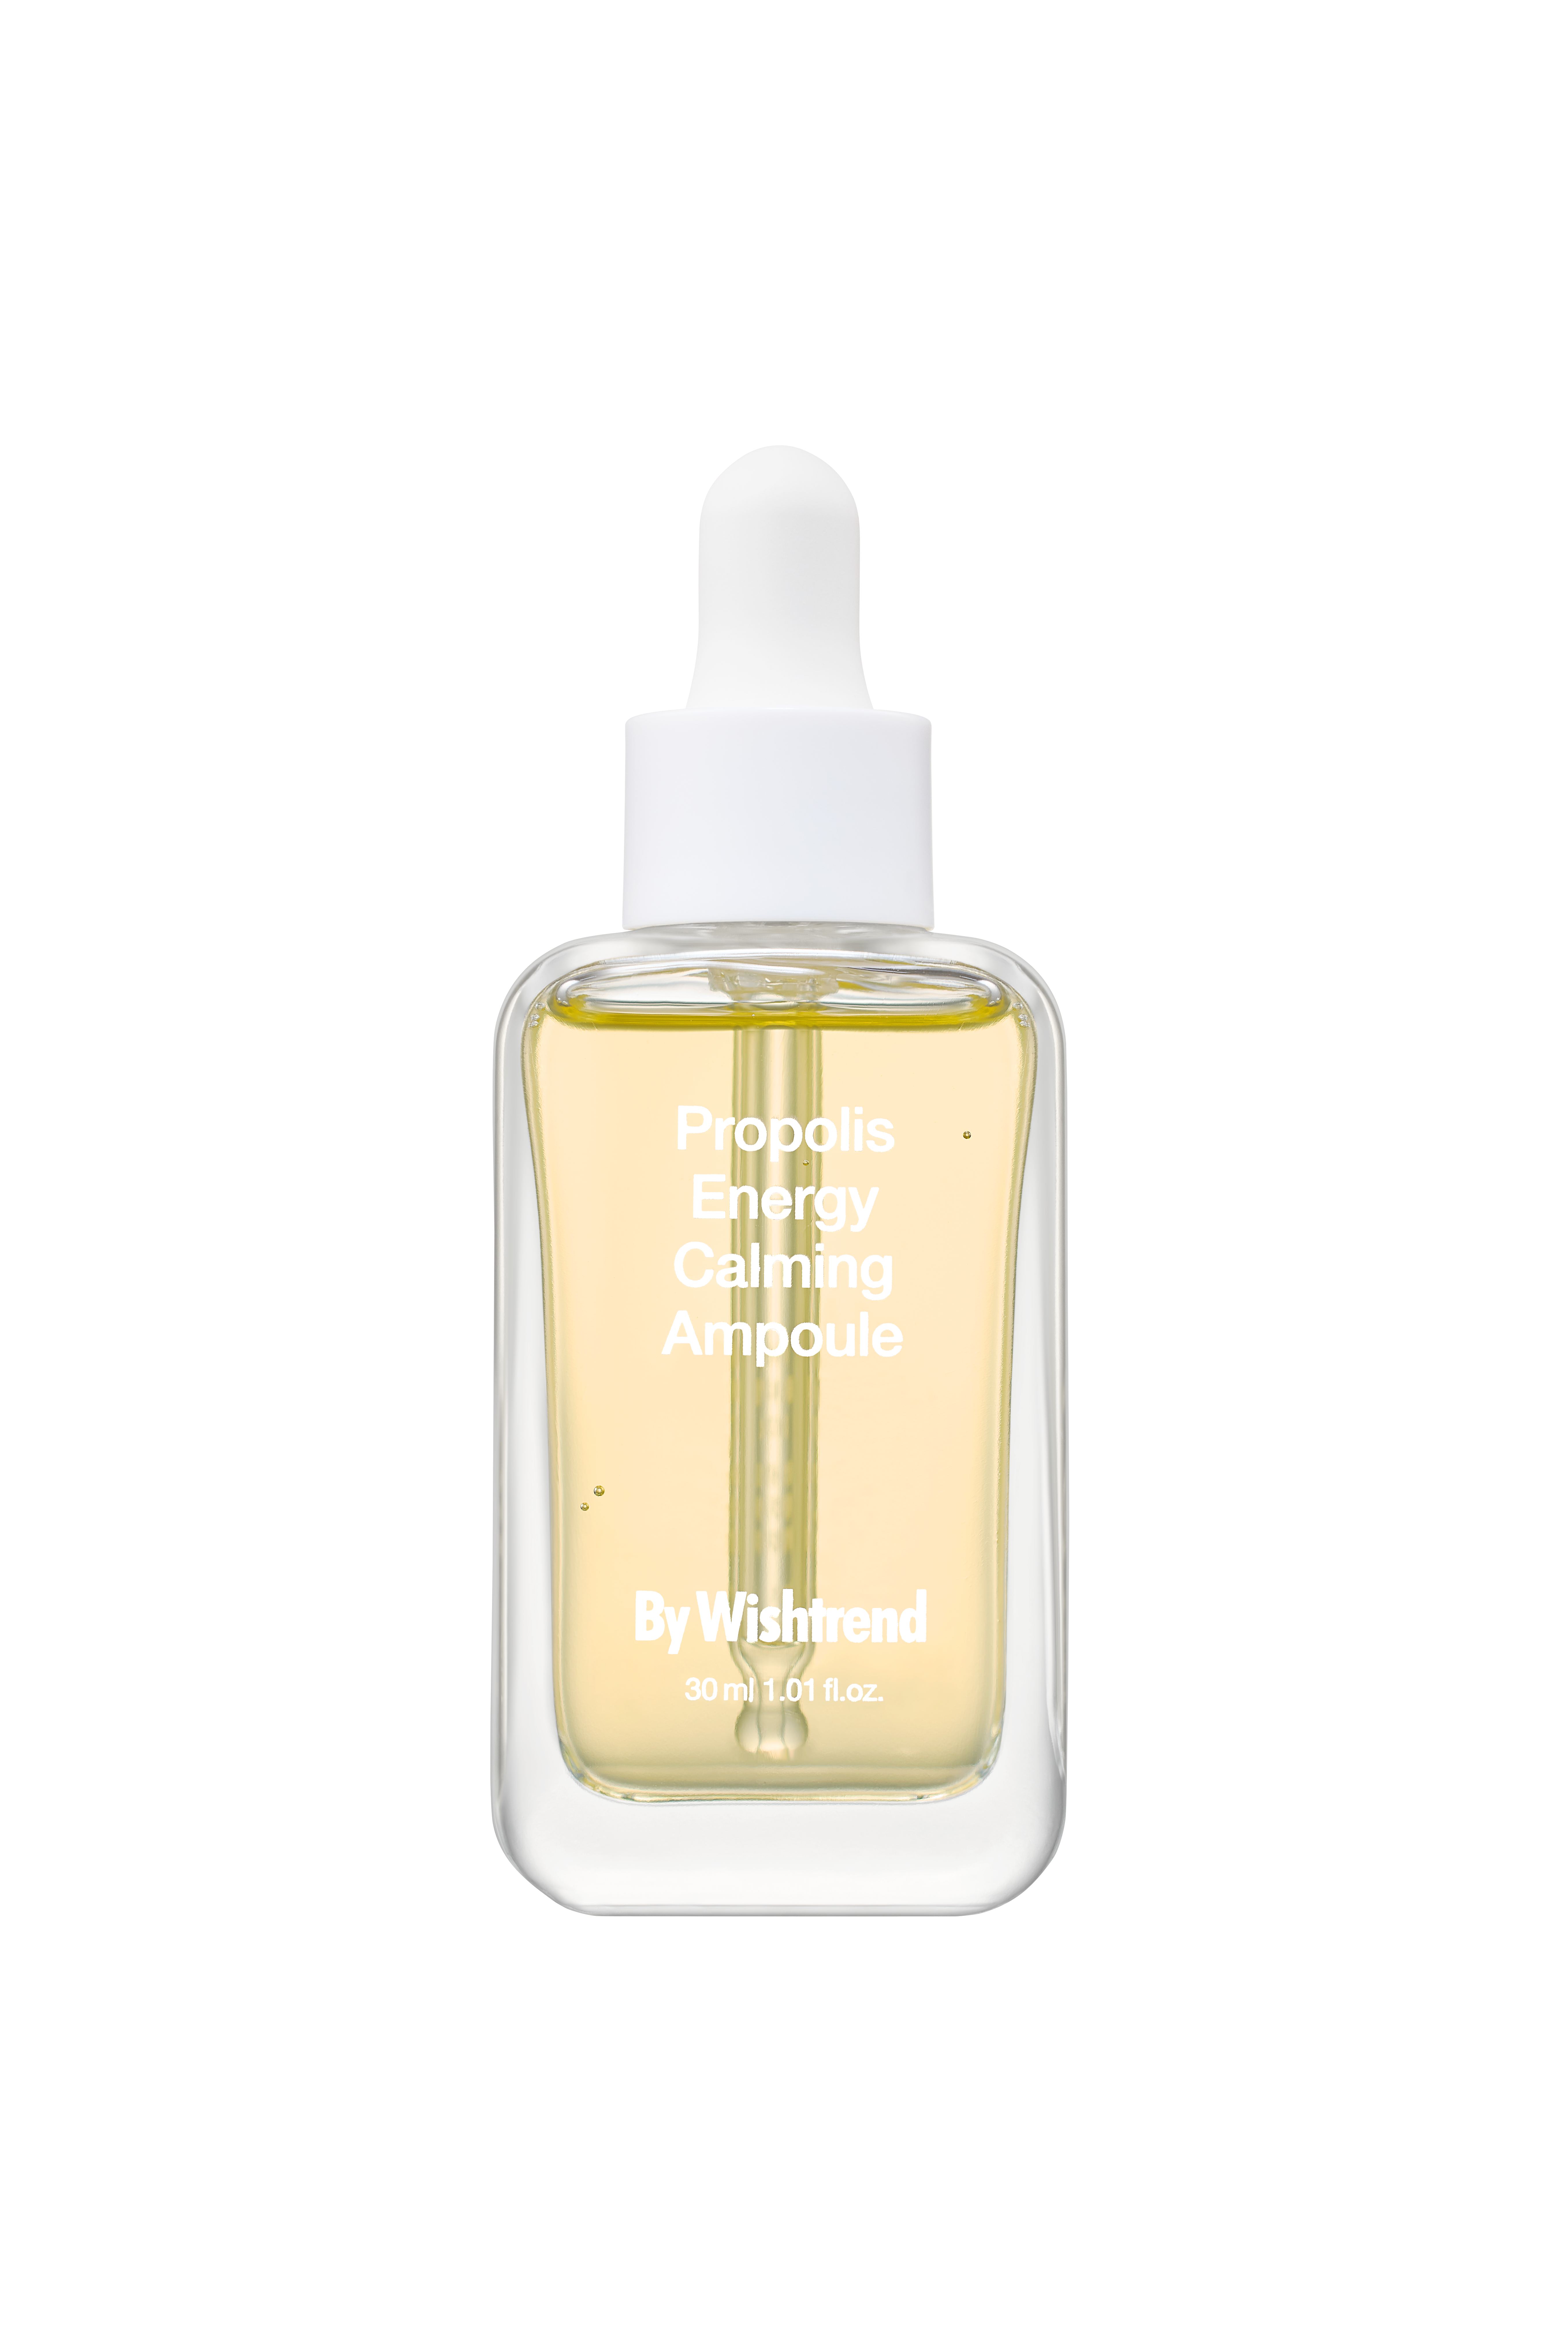 By Wishtrend Propolis Energy Calming Ampoule, 30 ml